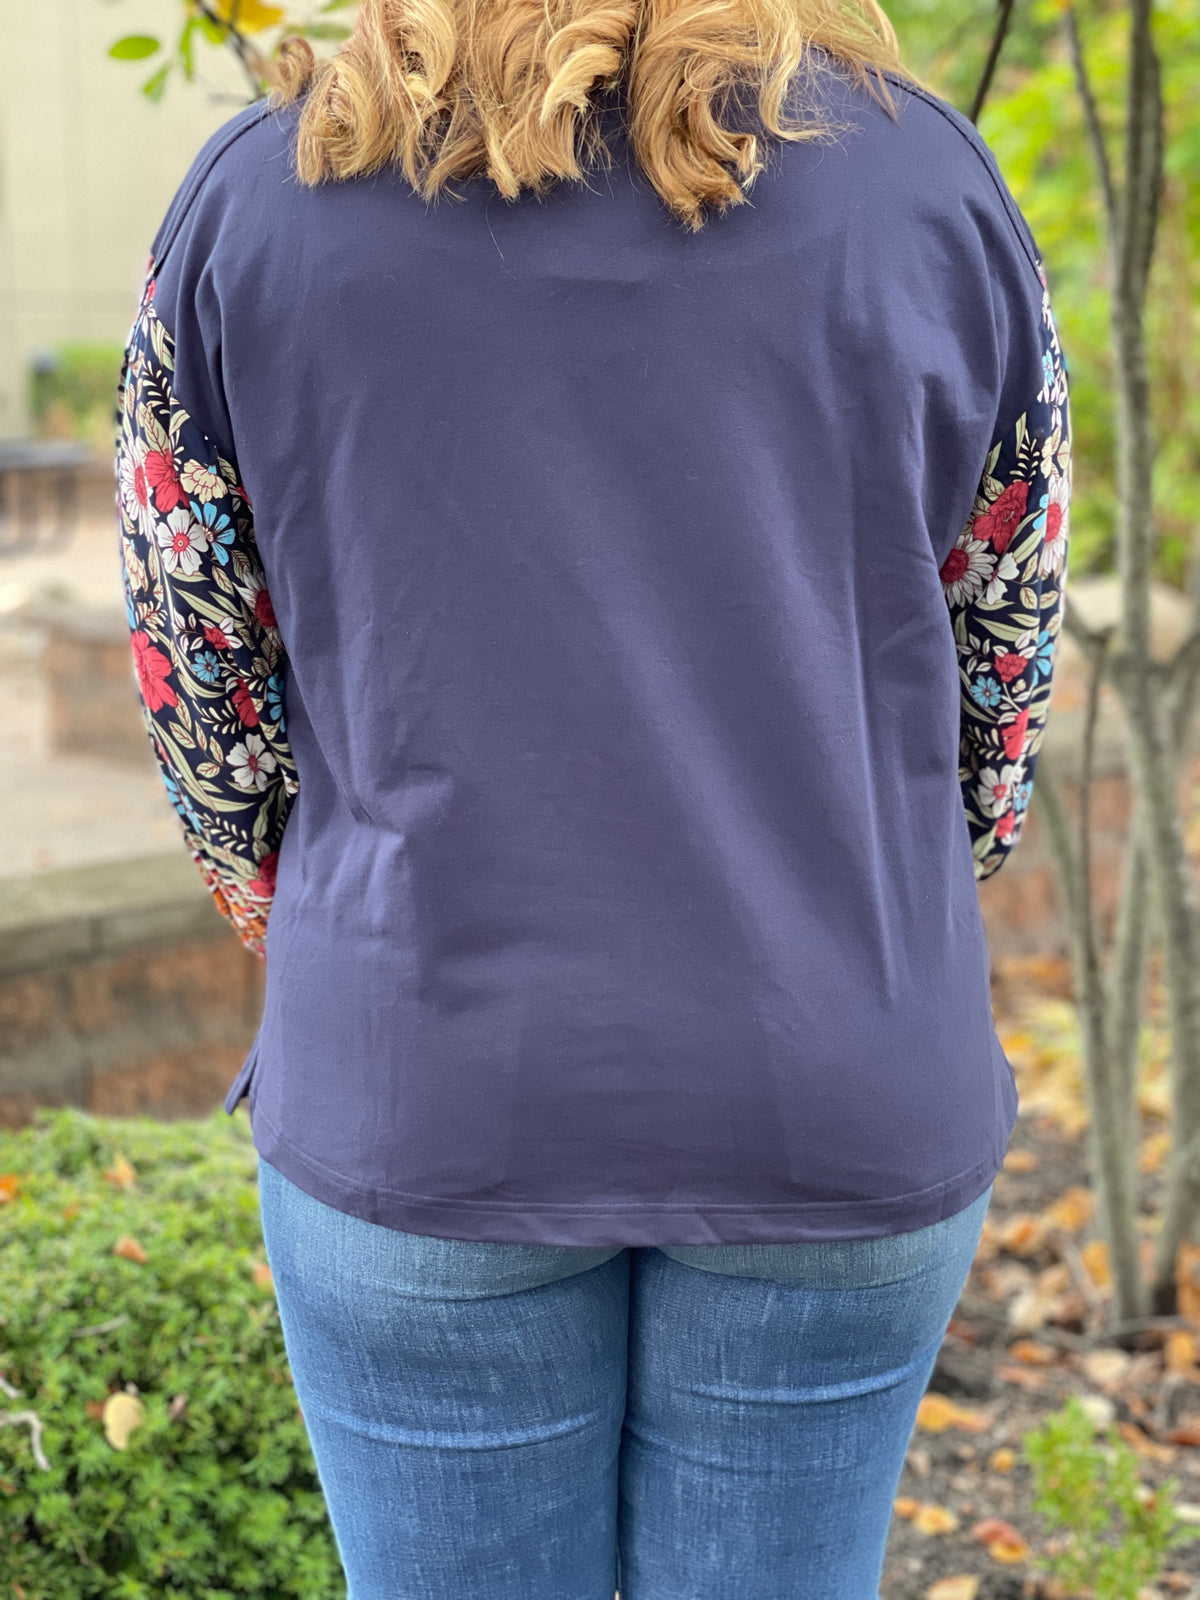 NAVY COTTON TOP W/ FLORAL CONTRAST SLEEVES